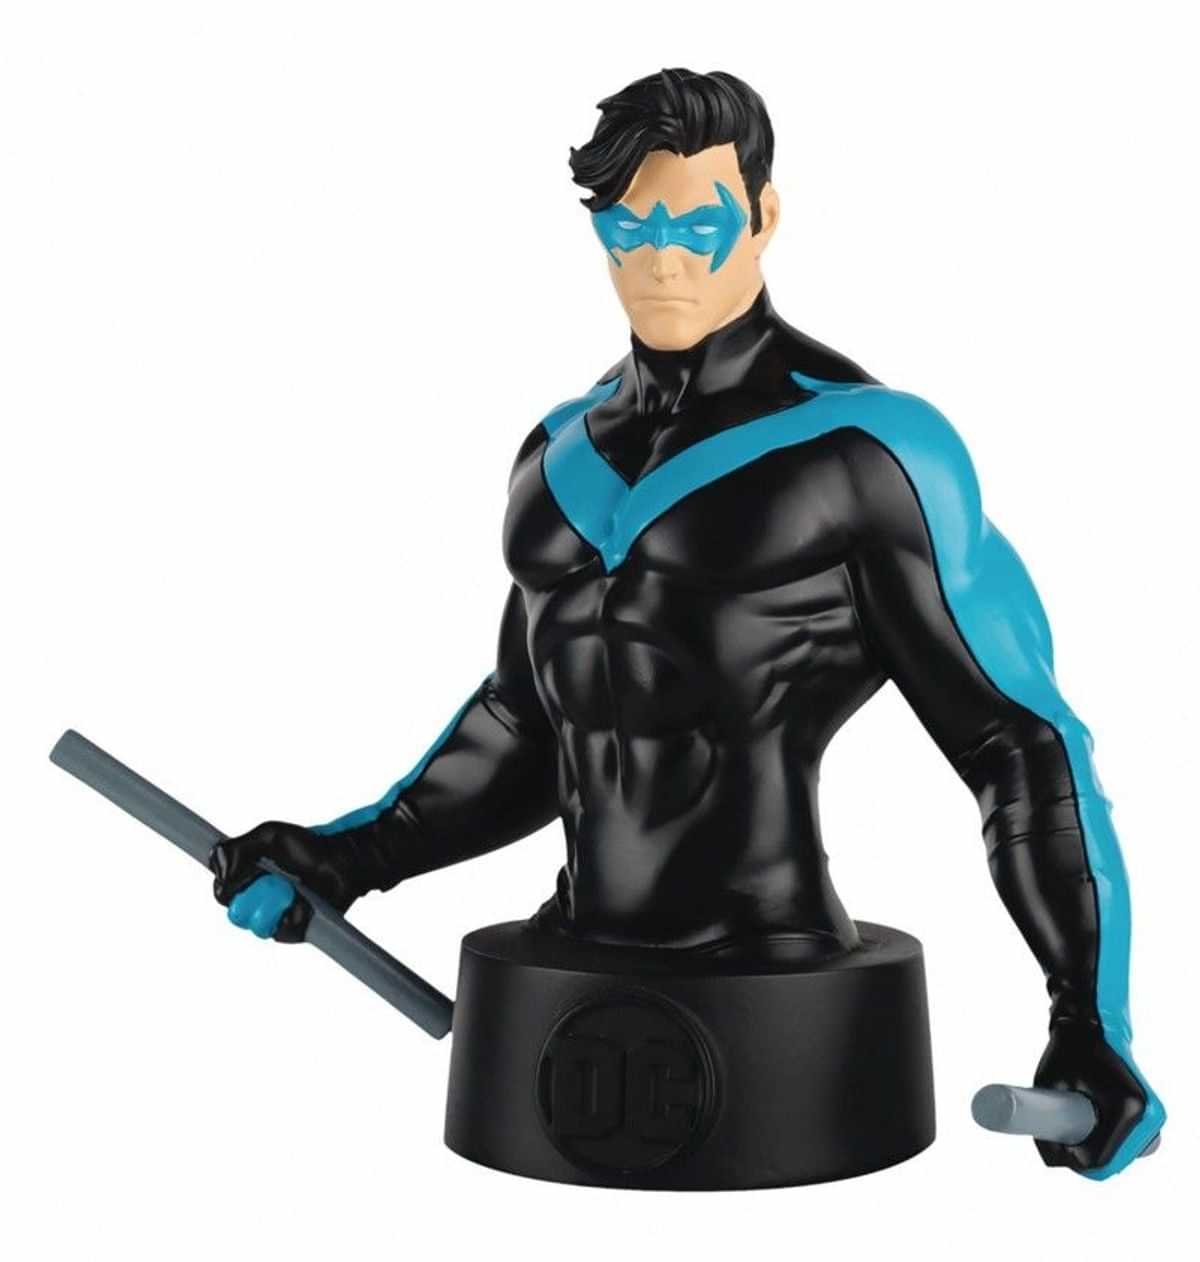 Nightwing Bust for sale online DC Collectibles DC Comics Super Heroes 